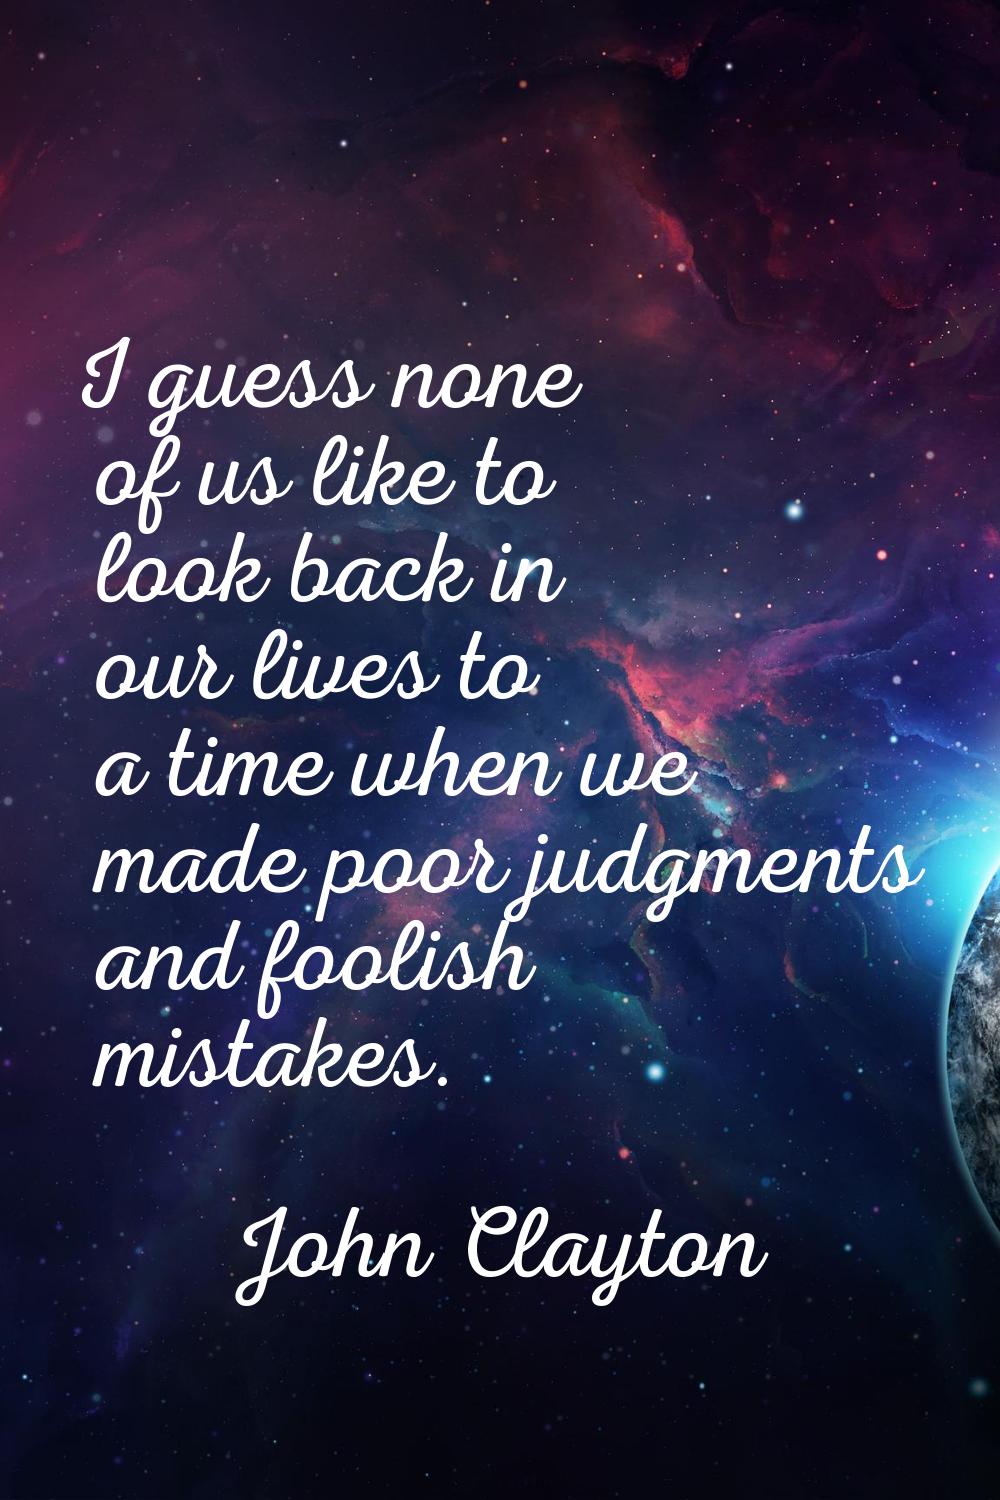 I guess none of us like to look back in our lives to a time when we made poor judgments and foolish